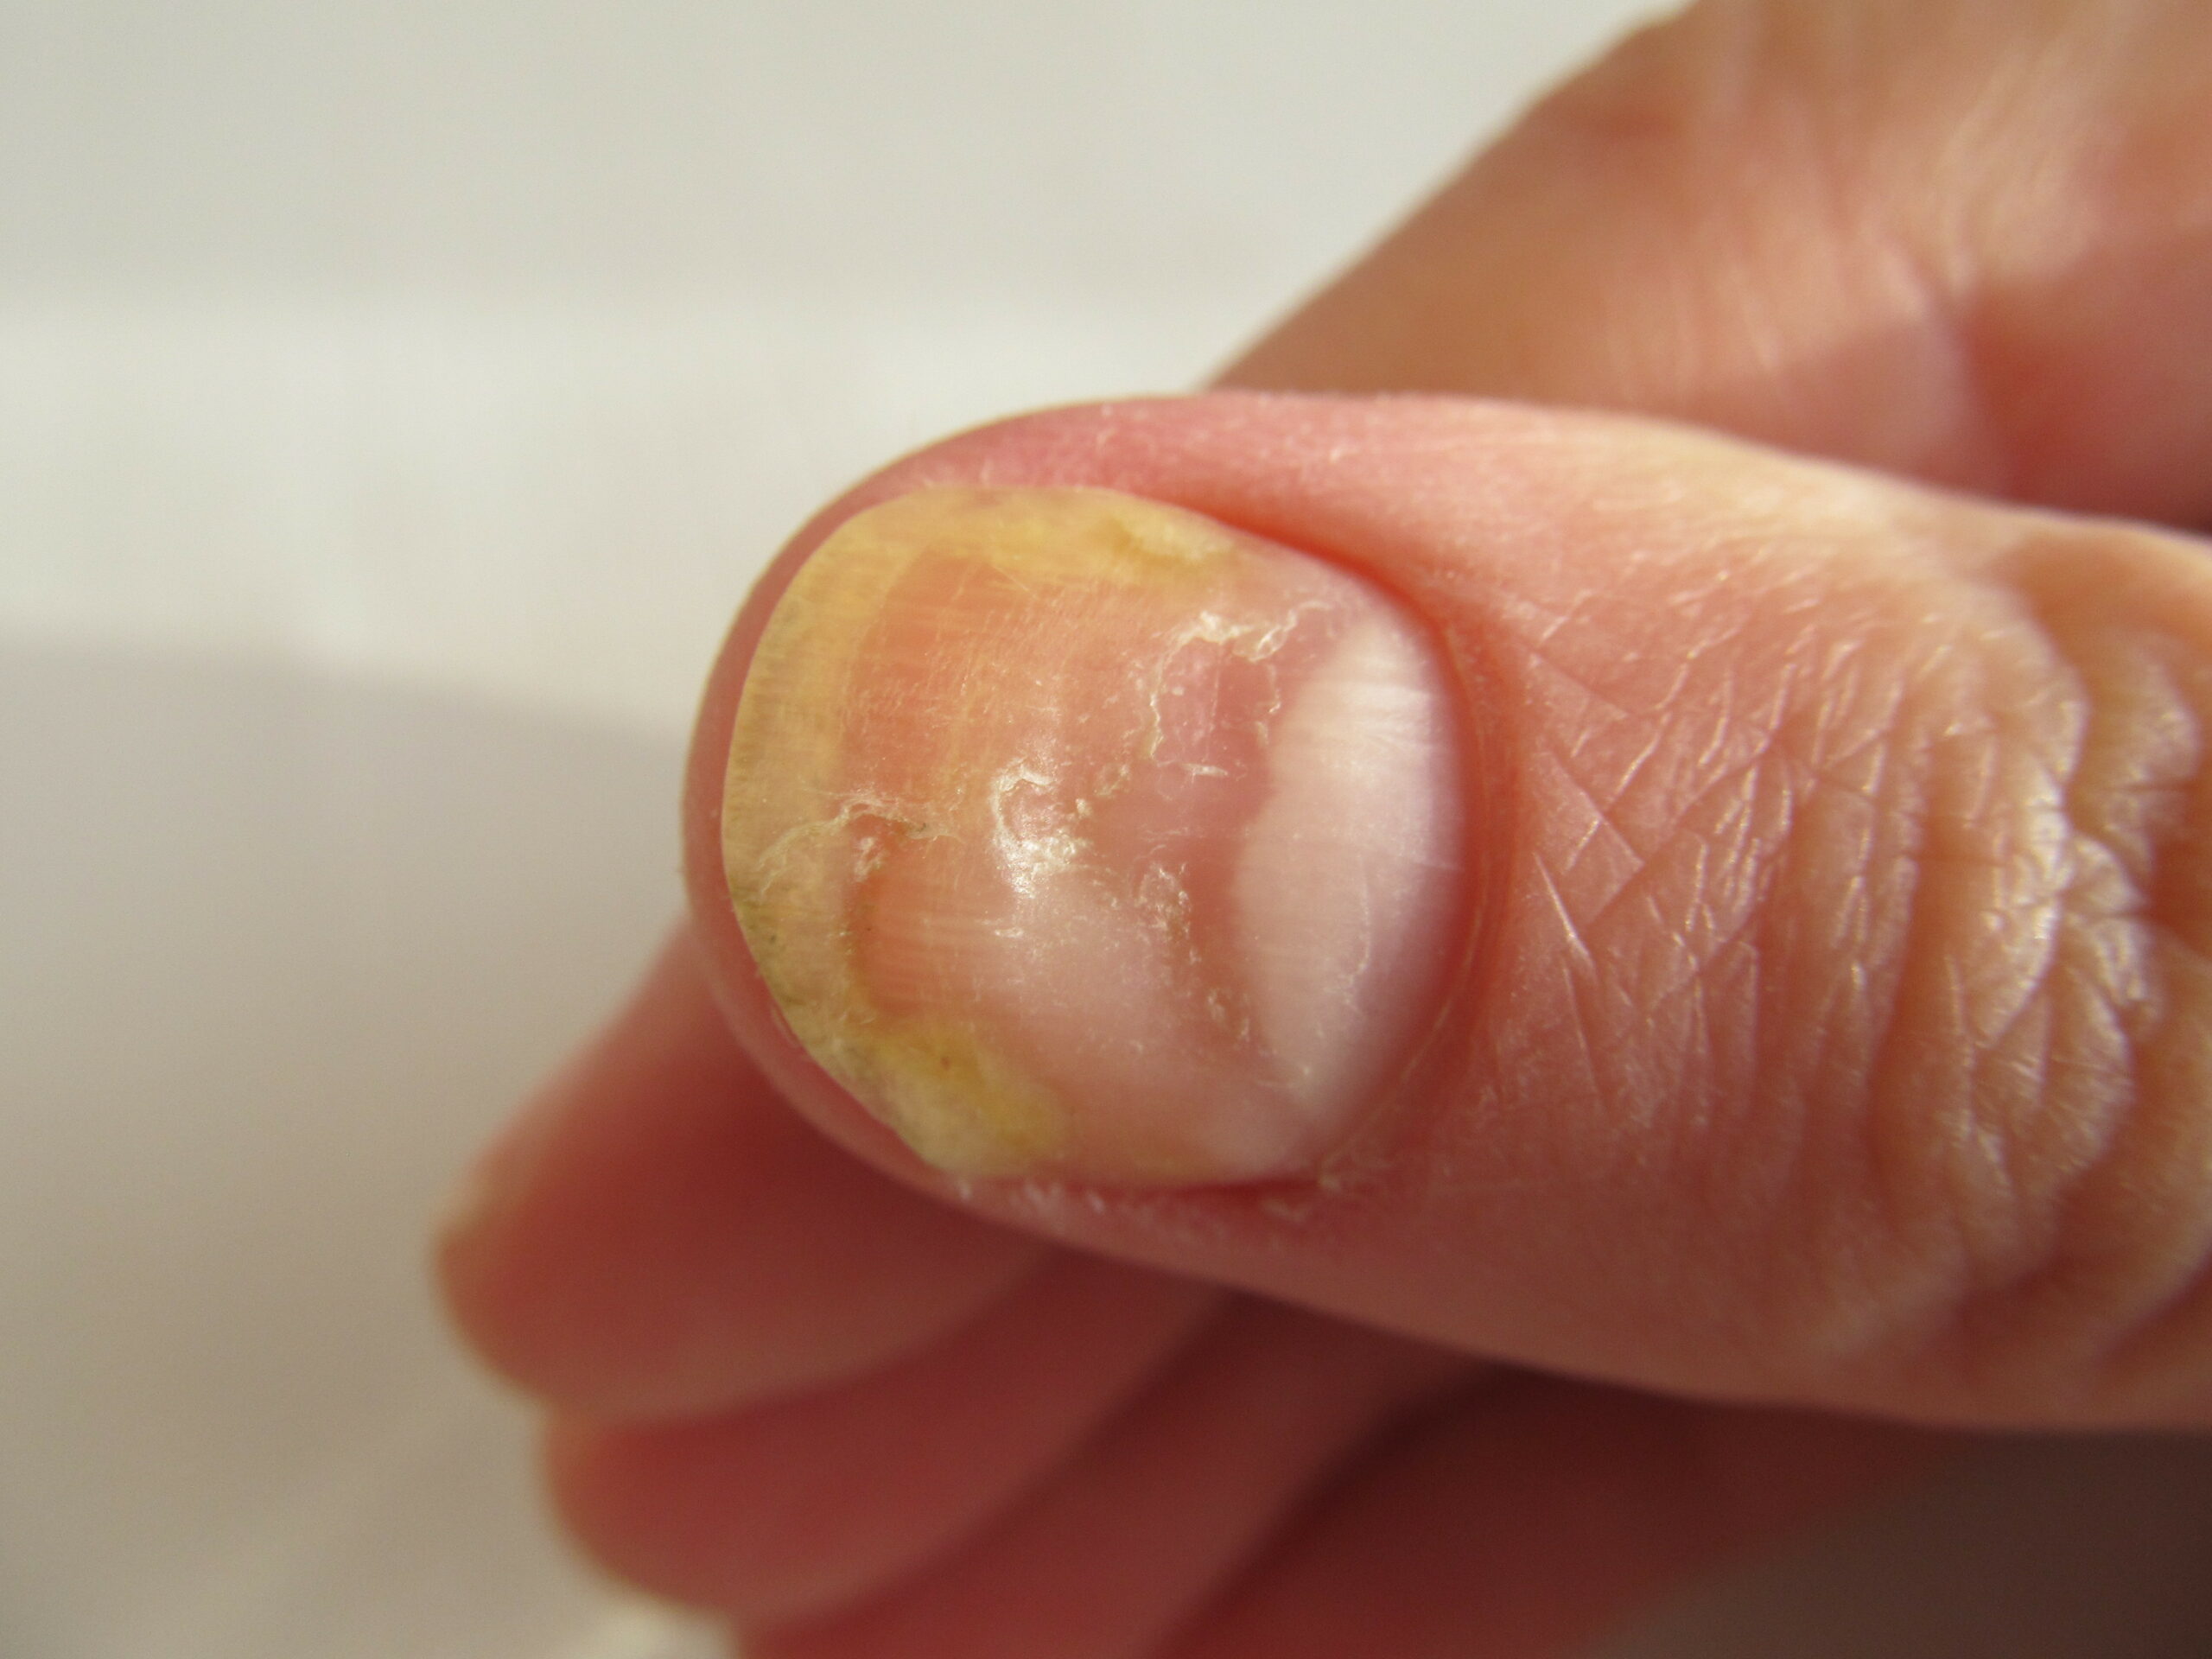 Find Nail Disease on the App Store